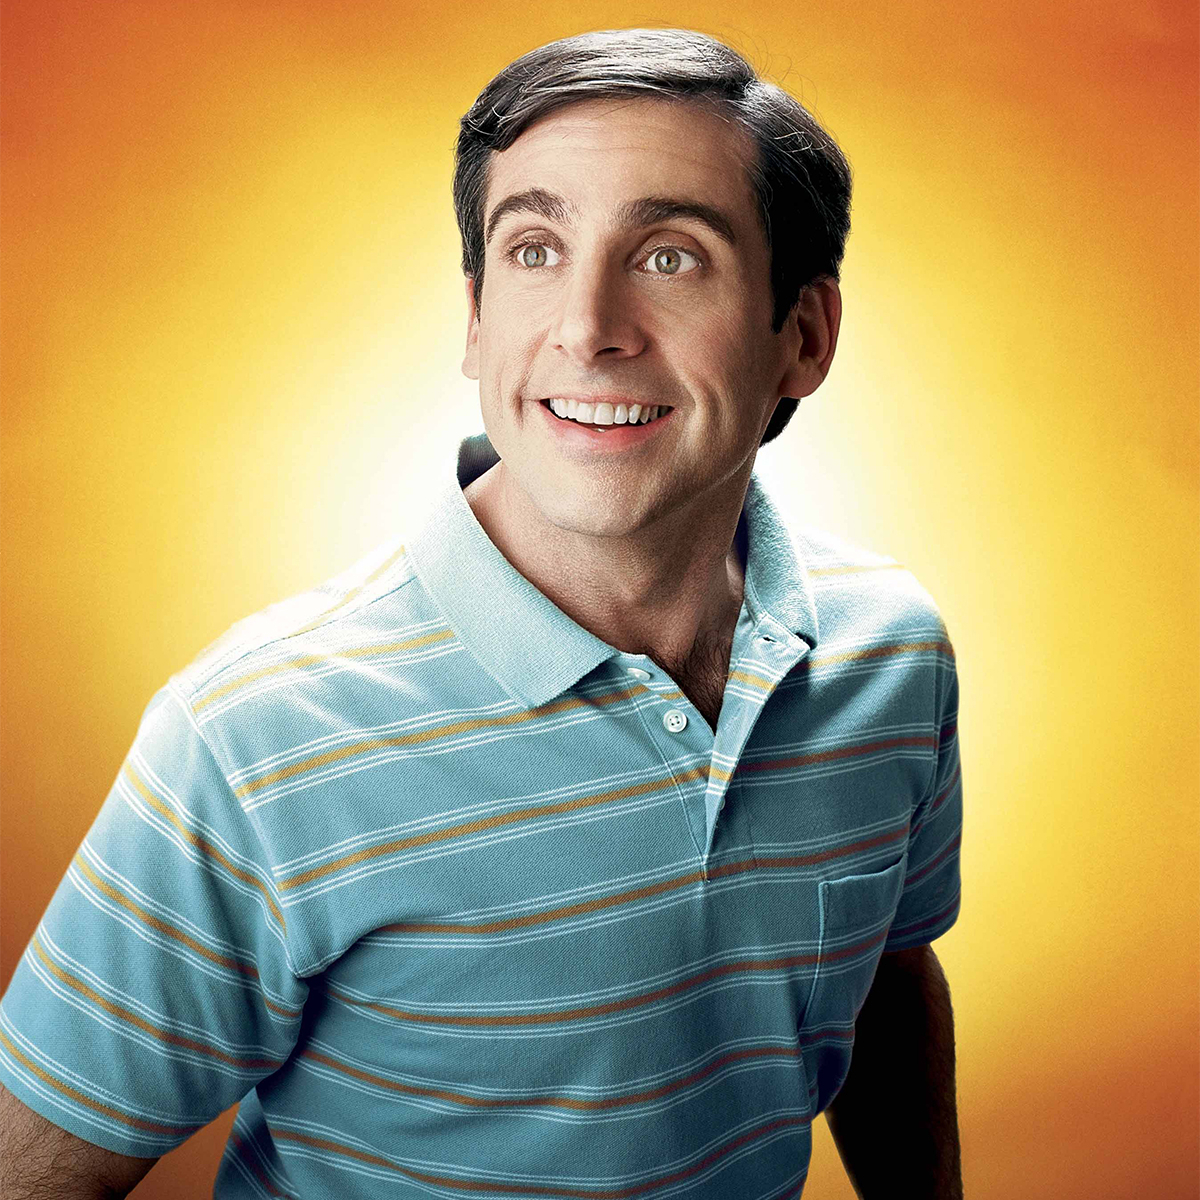 rs_1200x1200-200818102107-1200-steve-carell-40-year-old-virgin.jpg?fit=around%7C1200:1200&output-quality=90&crop=1200:1200;center,top